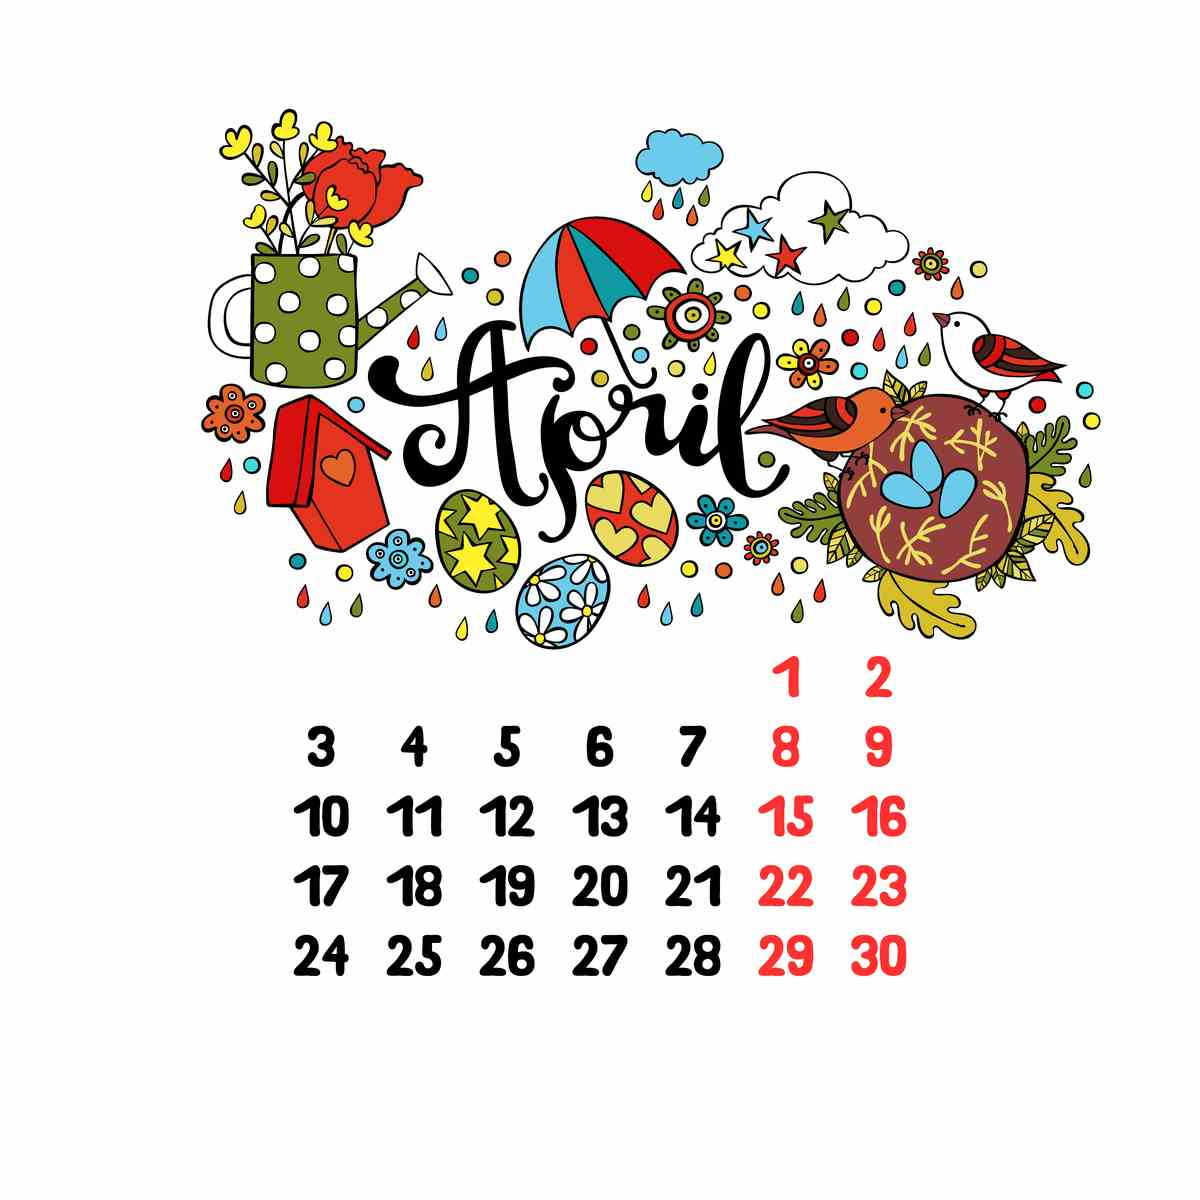 April calendar with flowers and Easter Eggs.